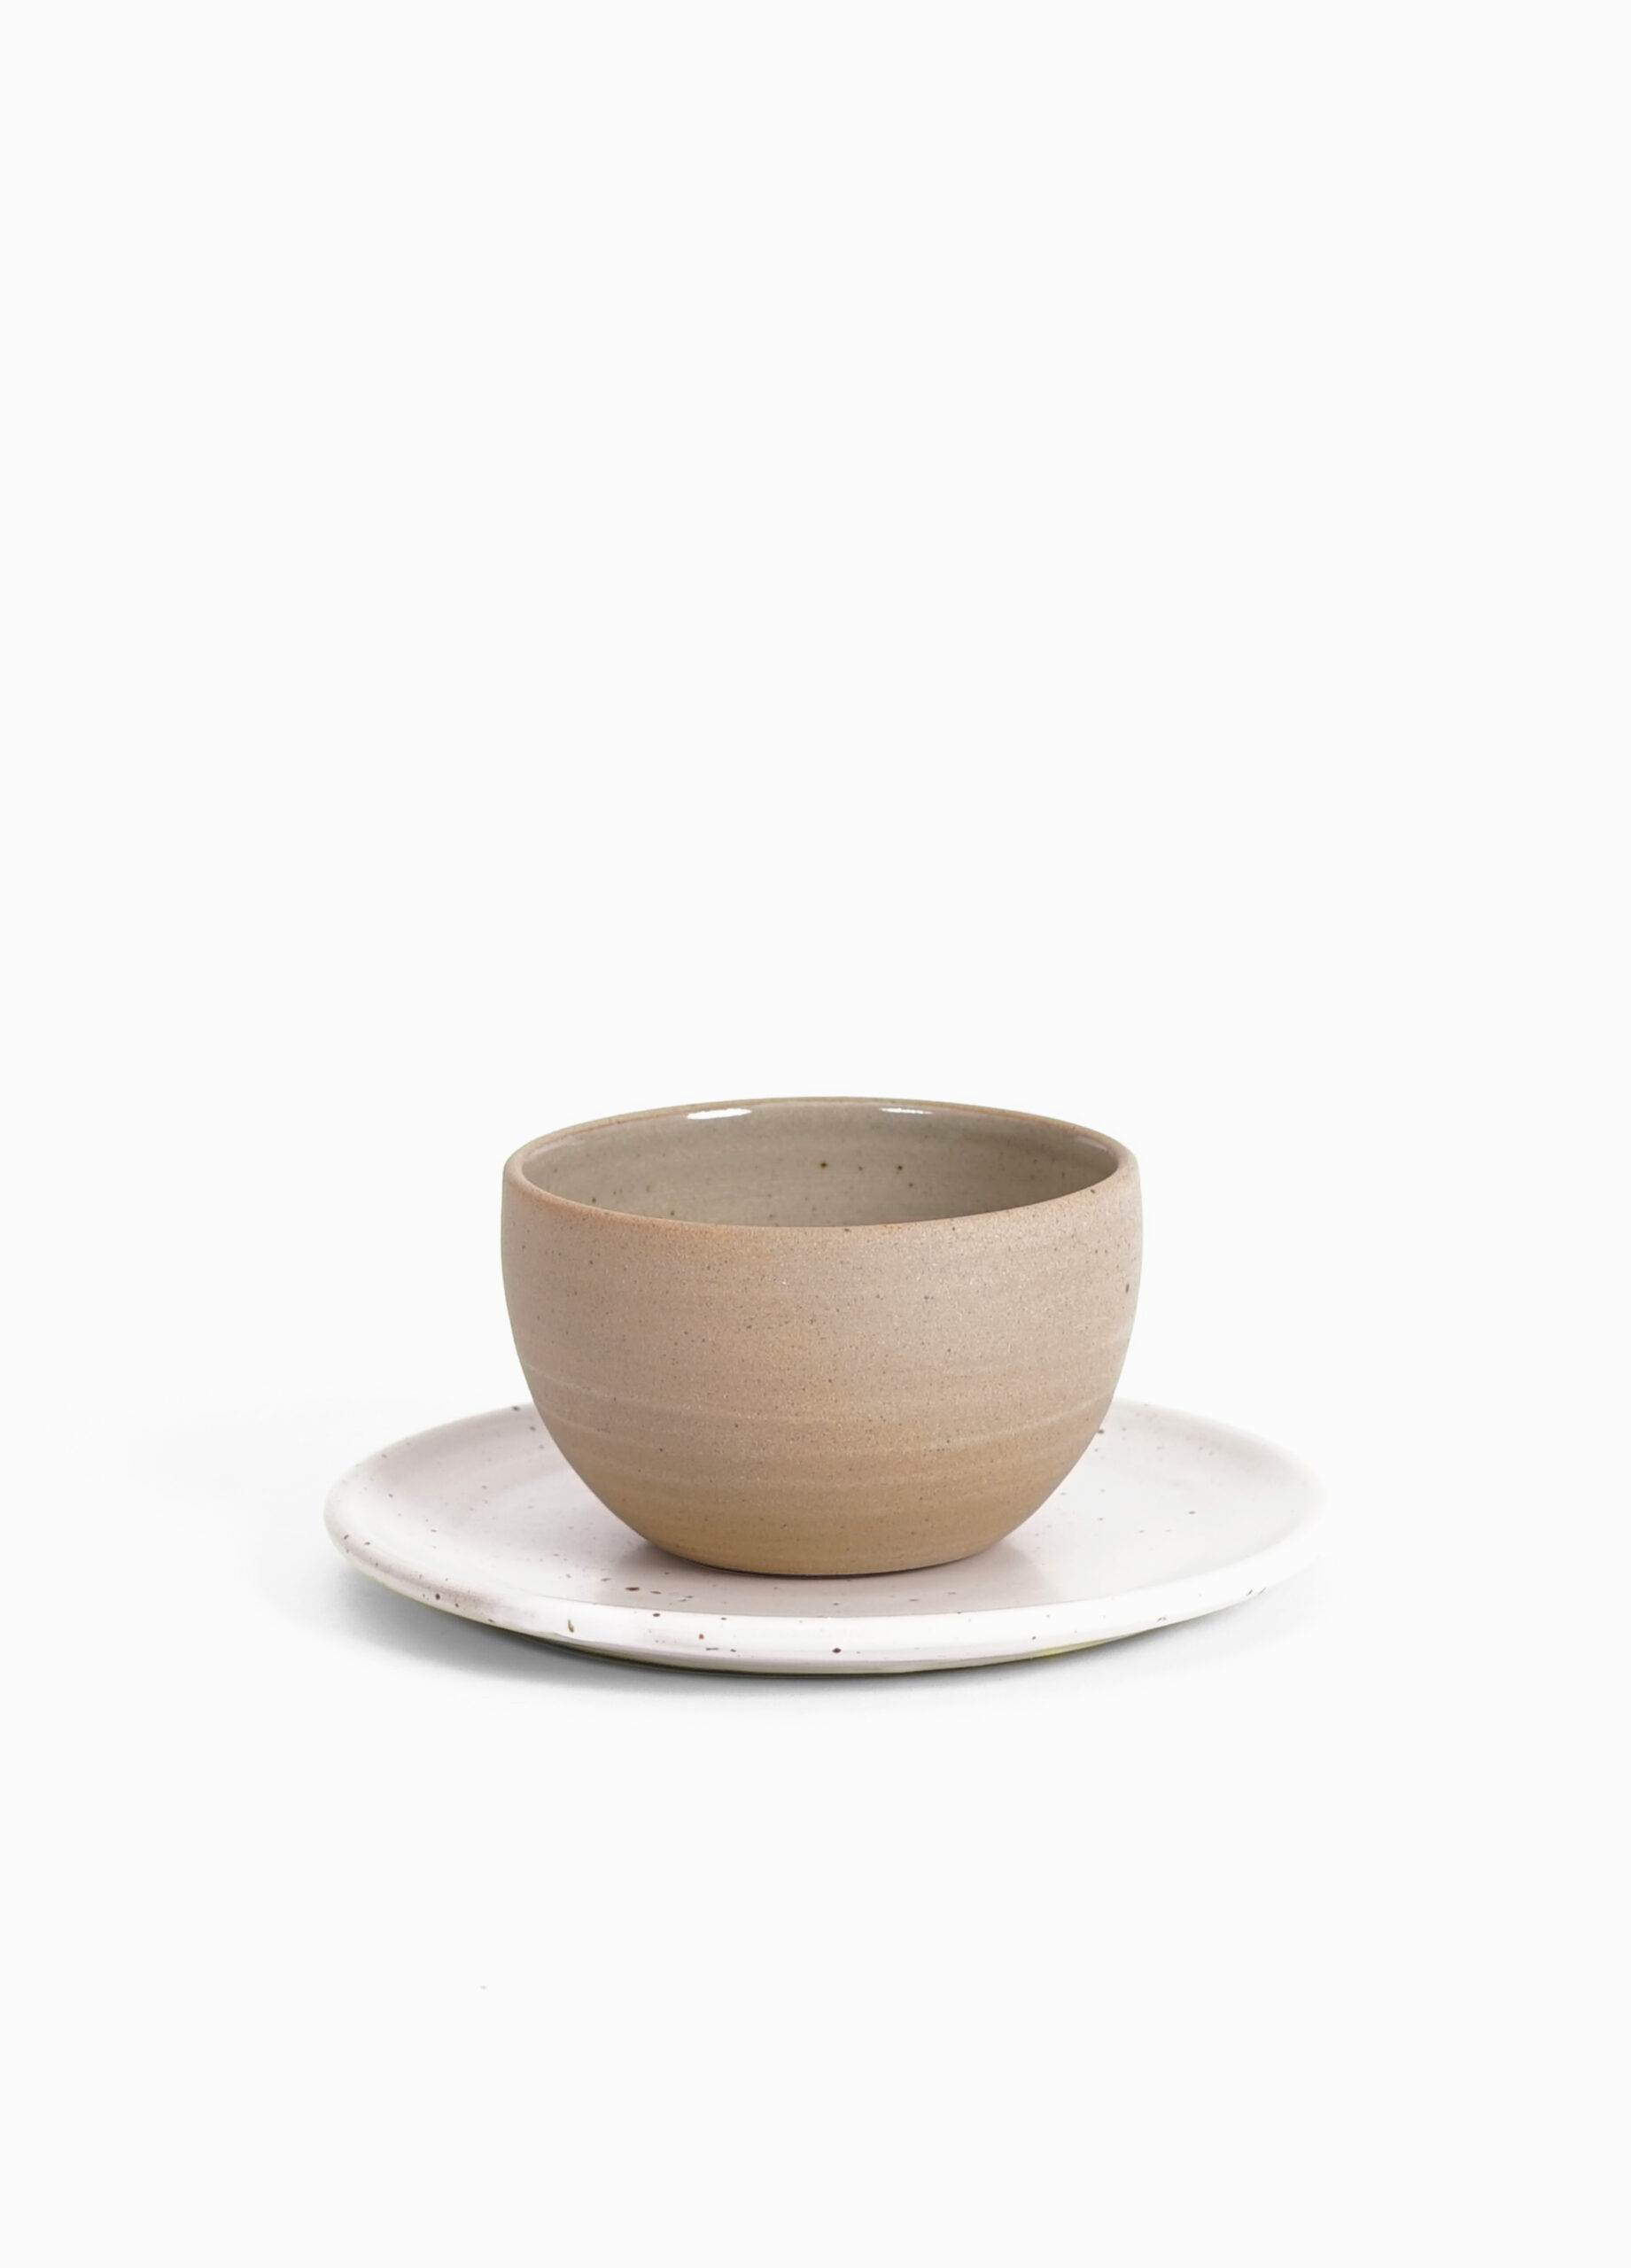 Unglazed Coffee and Tea Bowl in grey crafted from Stoneware Ceramic handmade in Germany